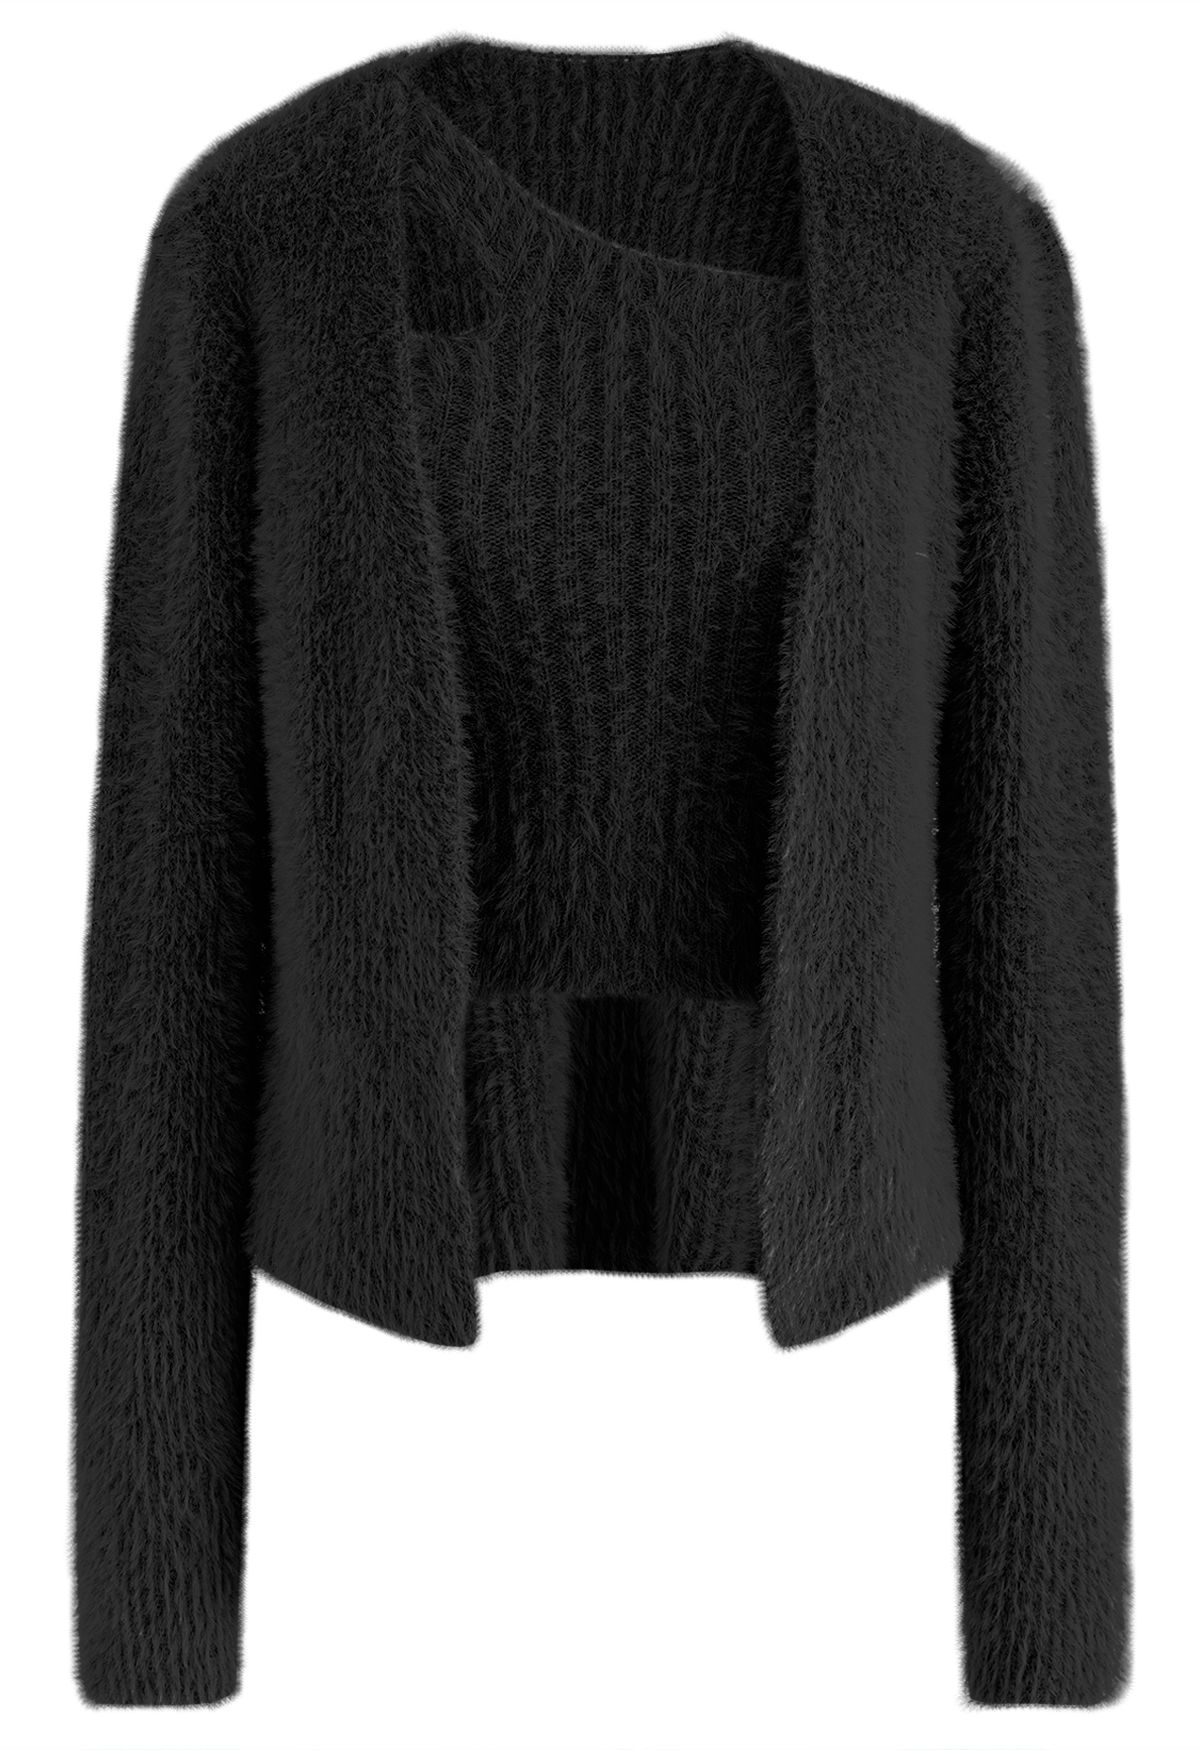 One-Shoulder Fuzzy Knit Top and Cardigan Set in Black